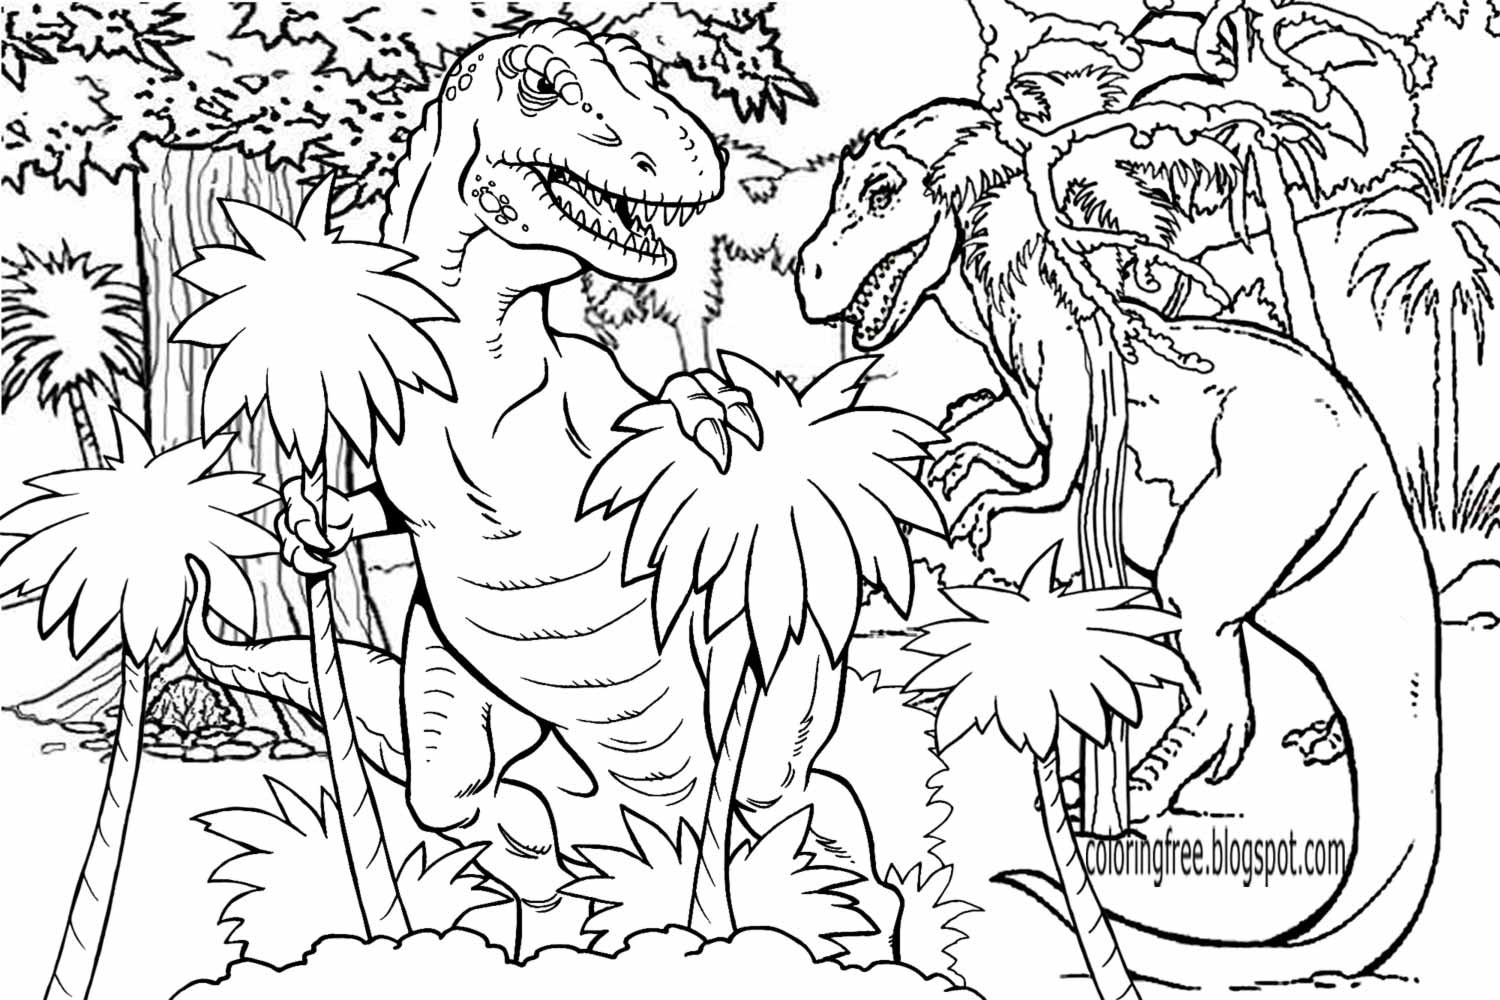 Dinosaur Coloring Pages For Adults
 LETS COLORING BOOK Prehistoric Jurassic World Dinosaurs